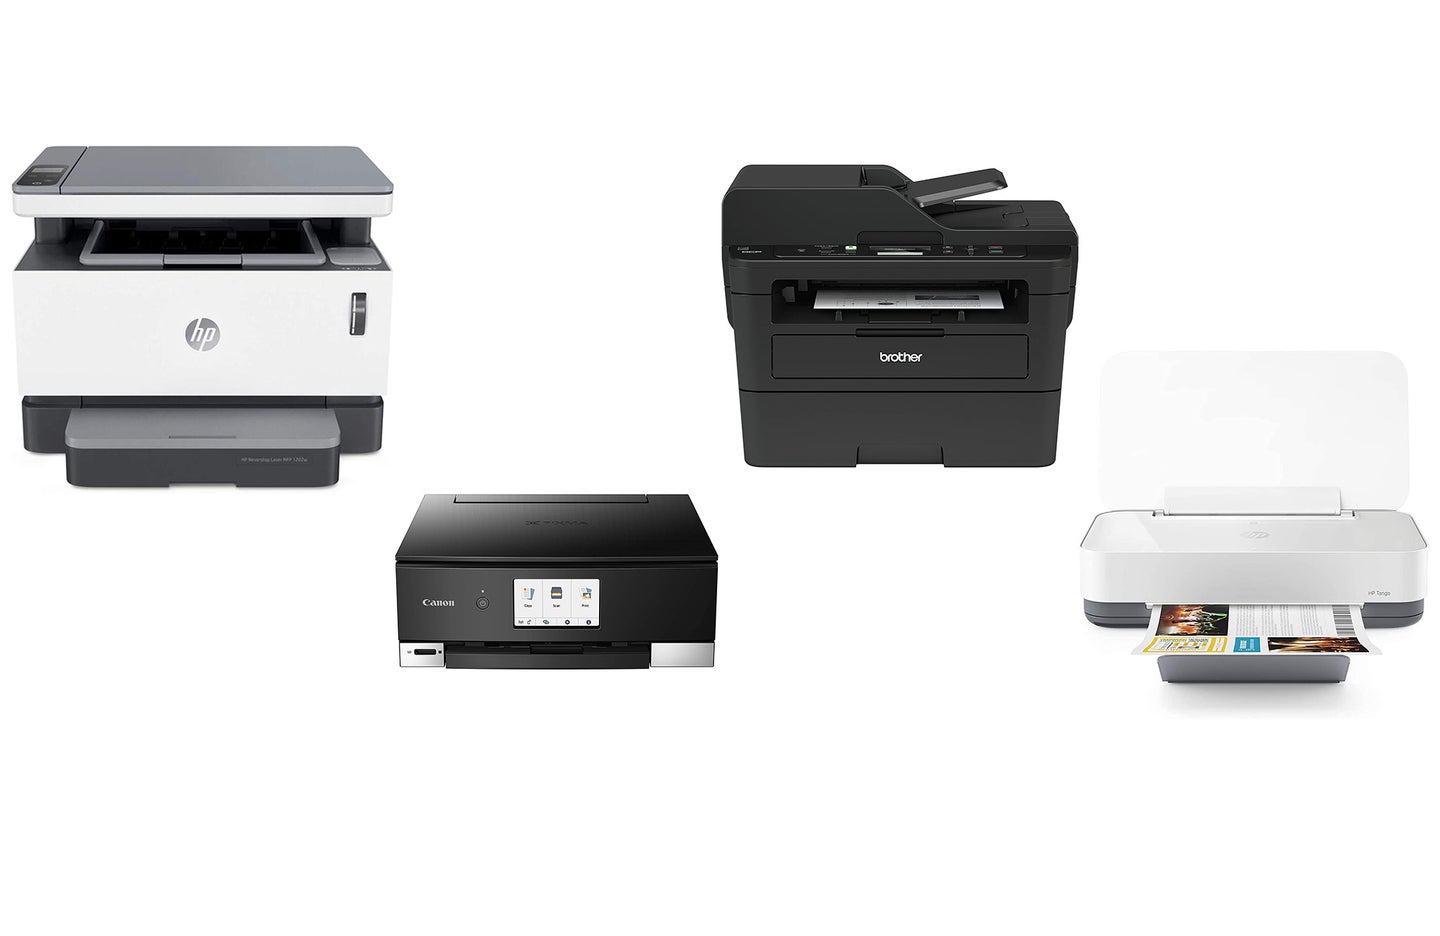 Take care of all your copying needs with our picks for the best copy machines.